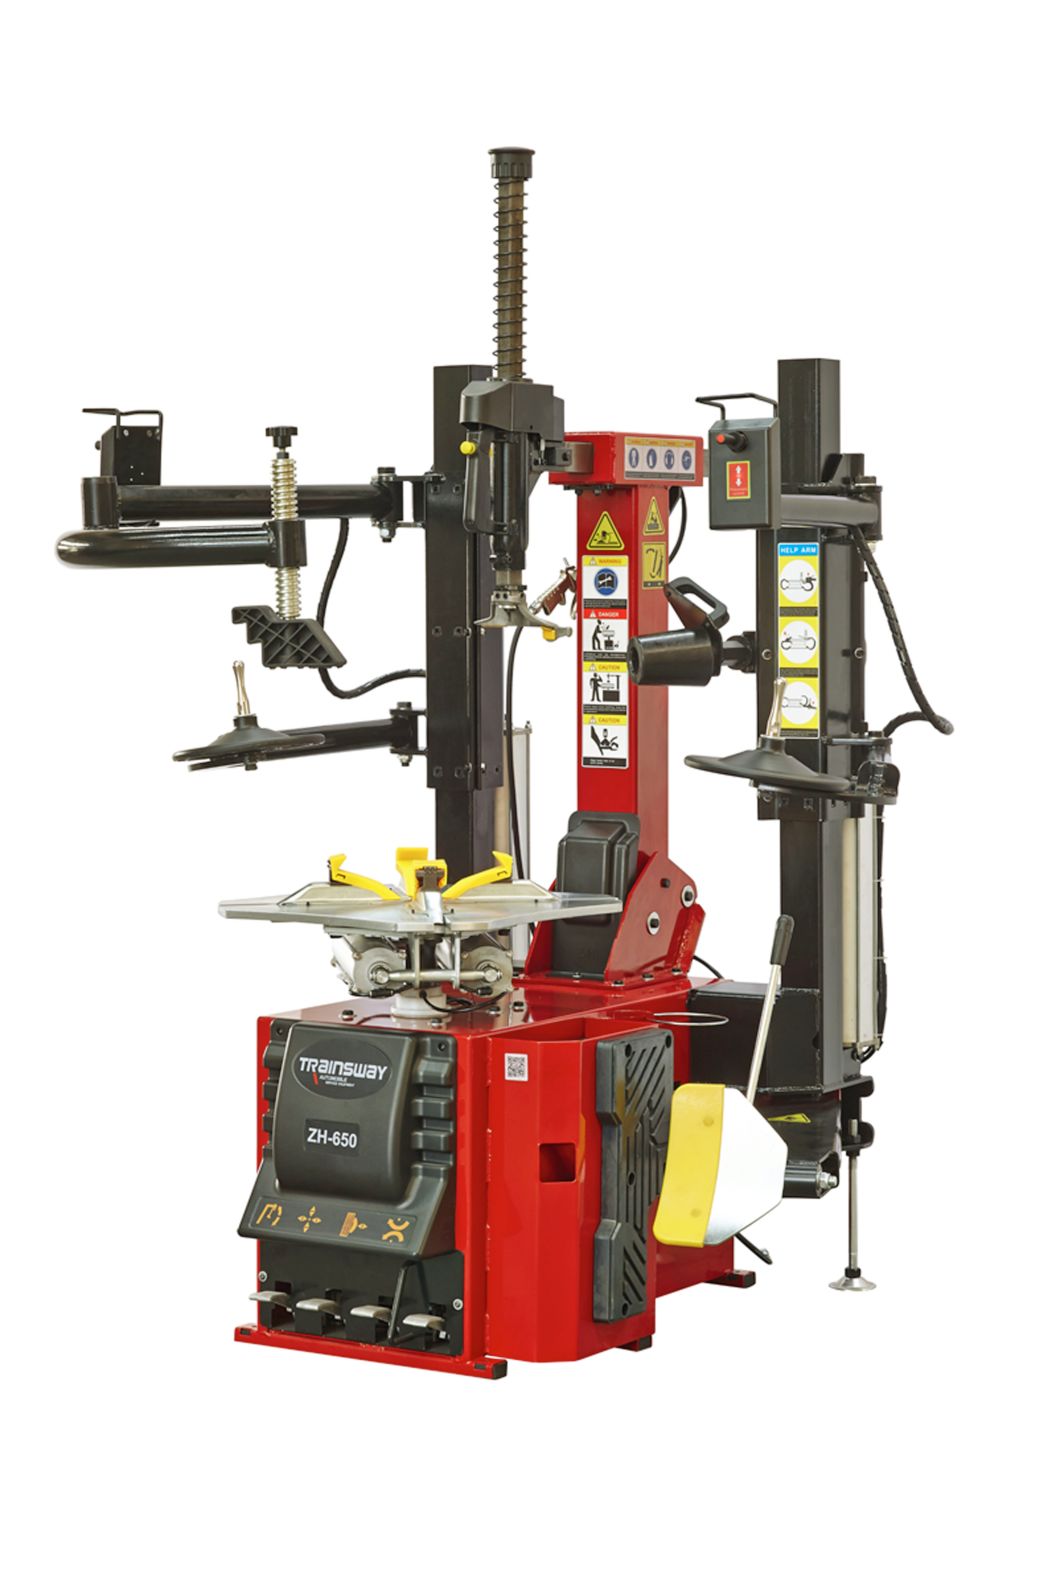 Heavy-Duty Tilt-Back Tyre Changer with Dual Assist Arms Trainsway Zh650SA